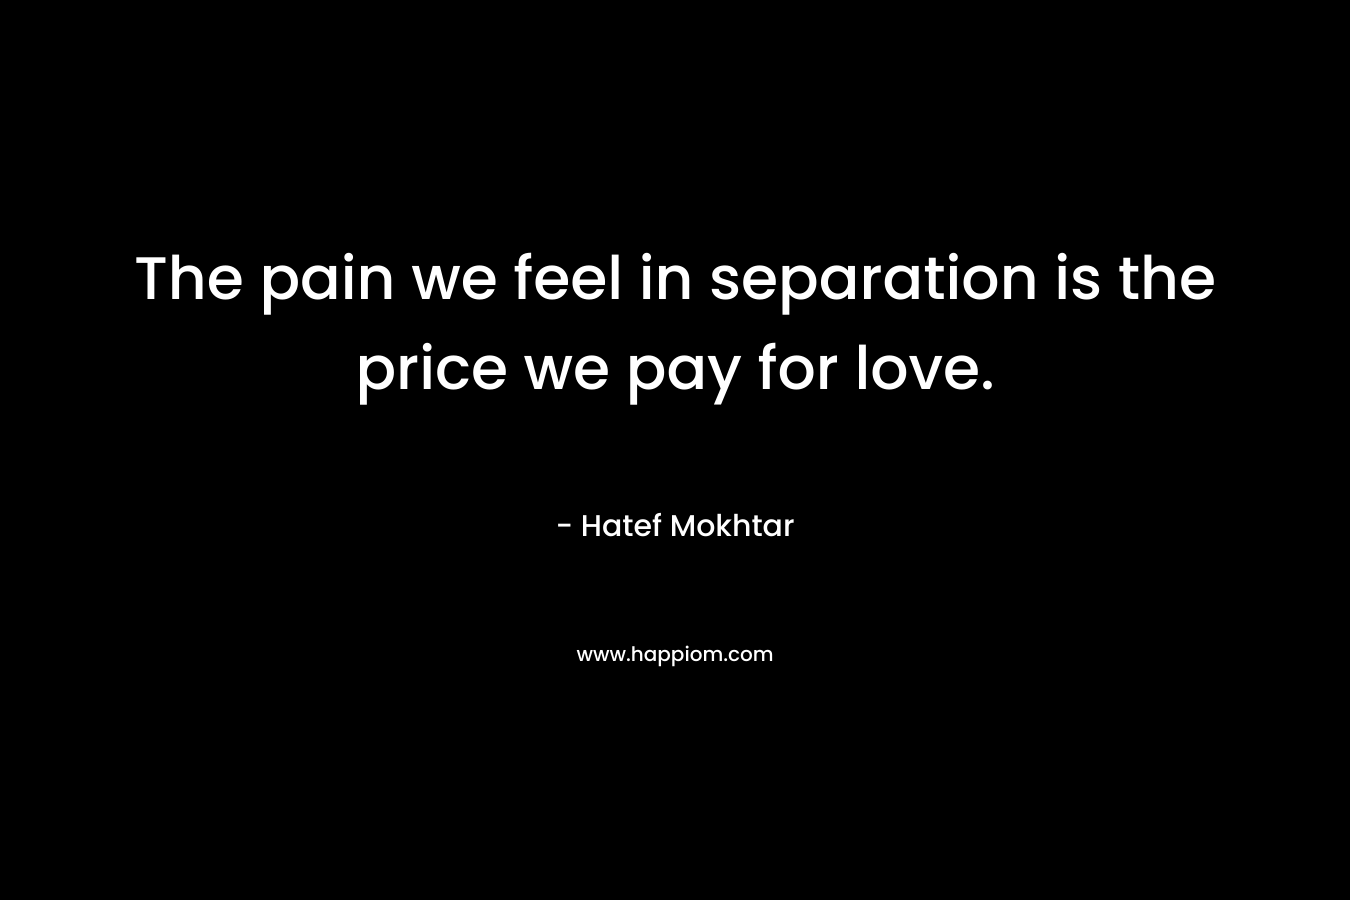 The pain we feel in separation is the price we pay for love. – Hatef Mokhtar